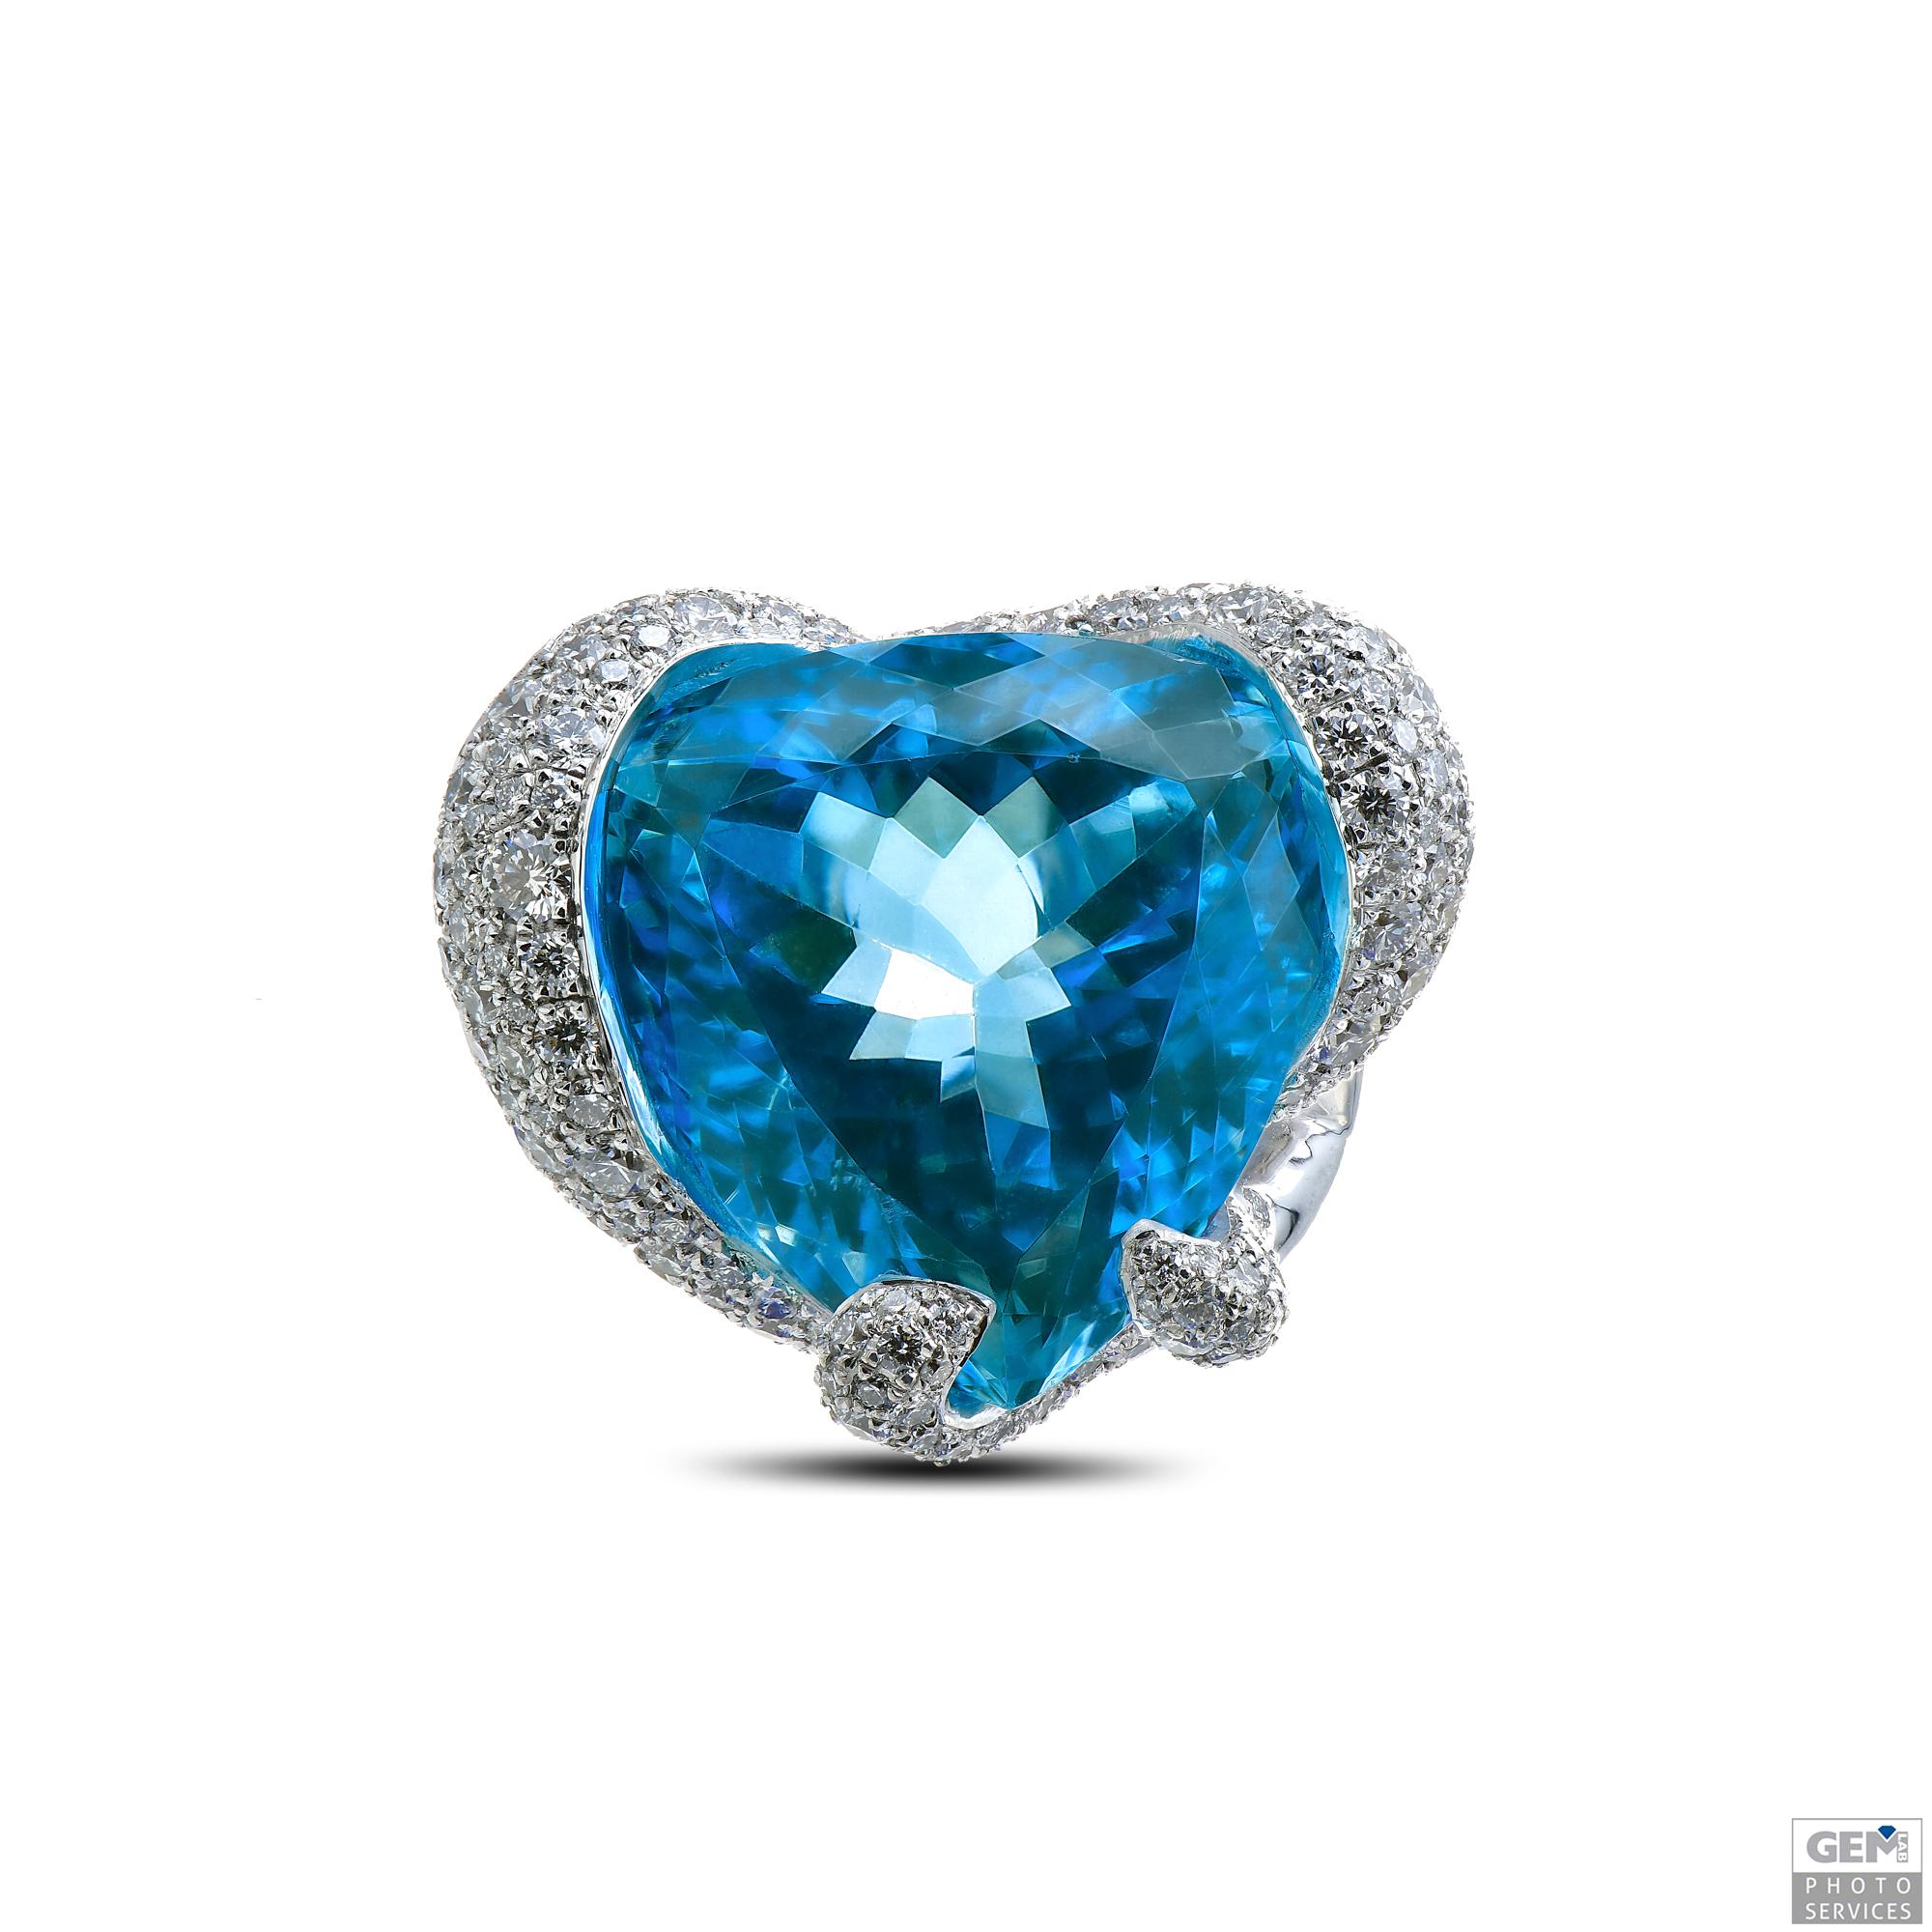  30.59 Carat Blue Topaz 18 Karat White Gold Triangle Cocktail Ring In New Condition For Sale In Knokke, BE